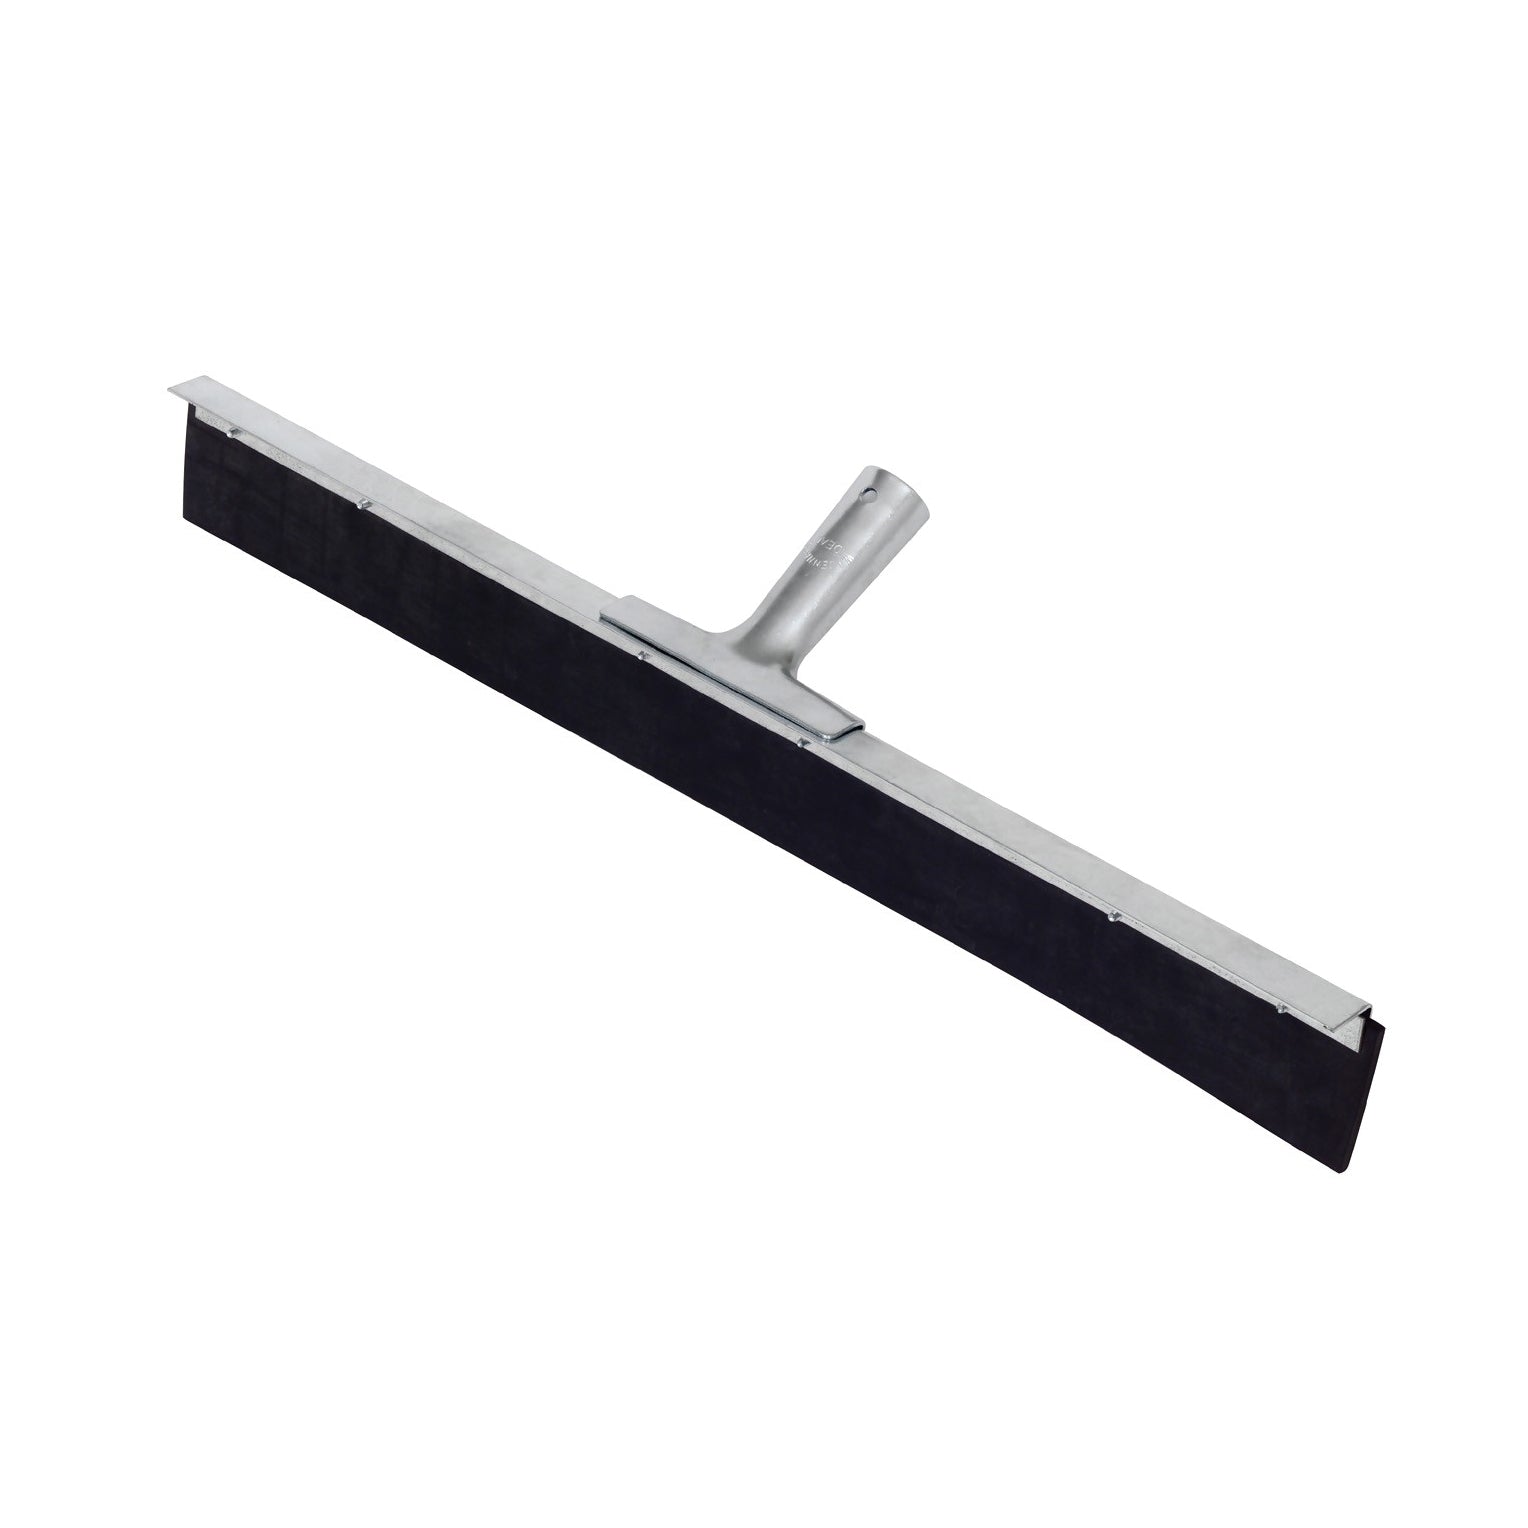 361202400 - Flo-Pac® 24 Straight Blade Black Rubber Squeegee 24 - Black